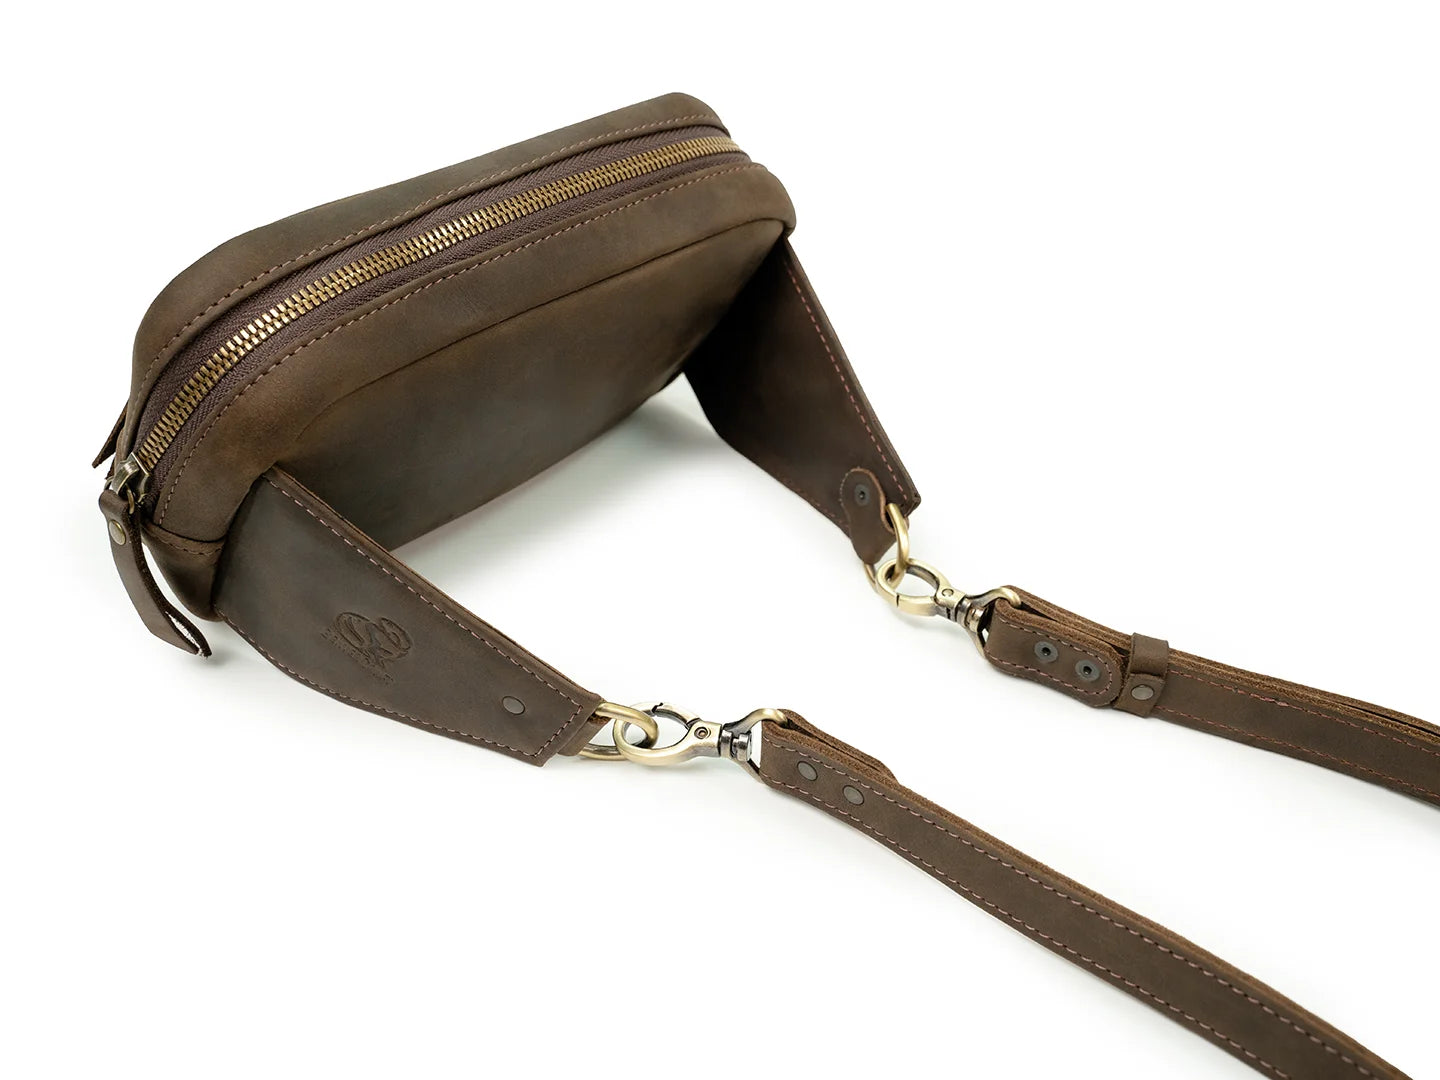 Quest – Leather Waist Bag Fanny Pack Bum Bag for Men and Women